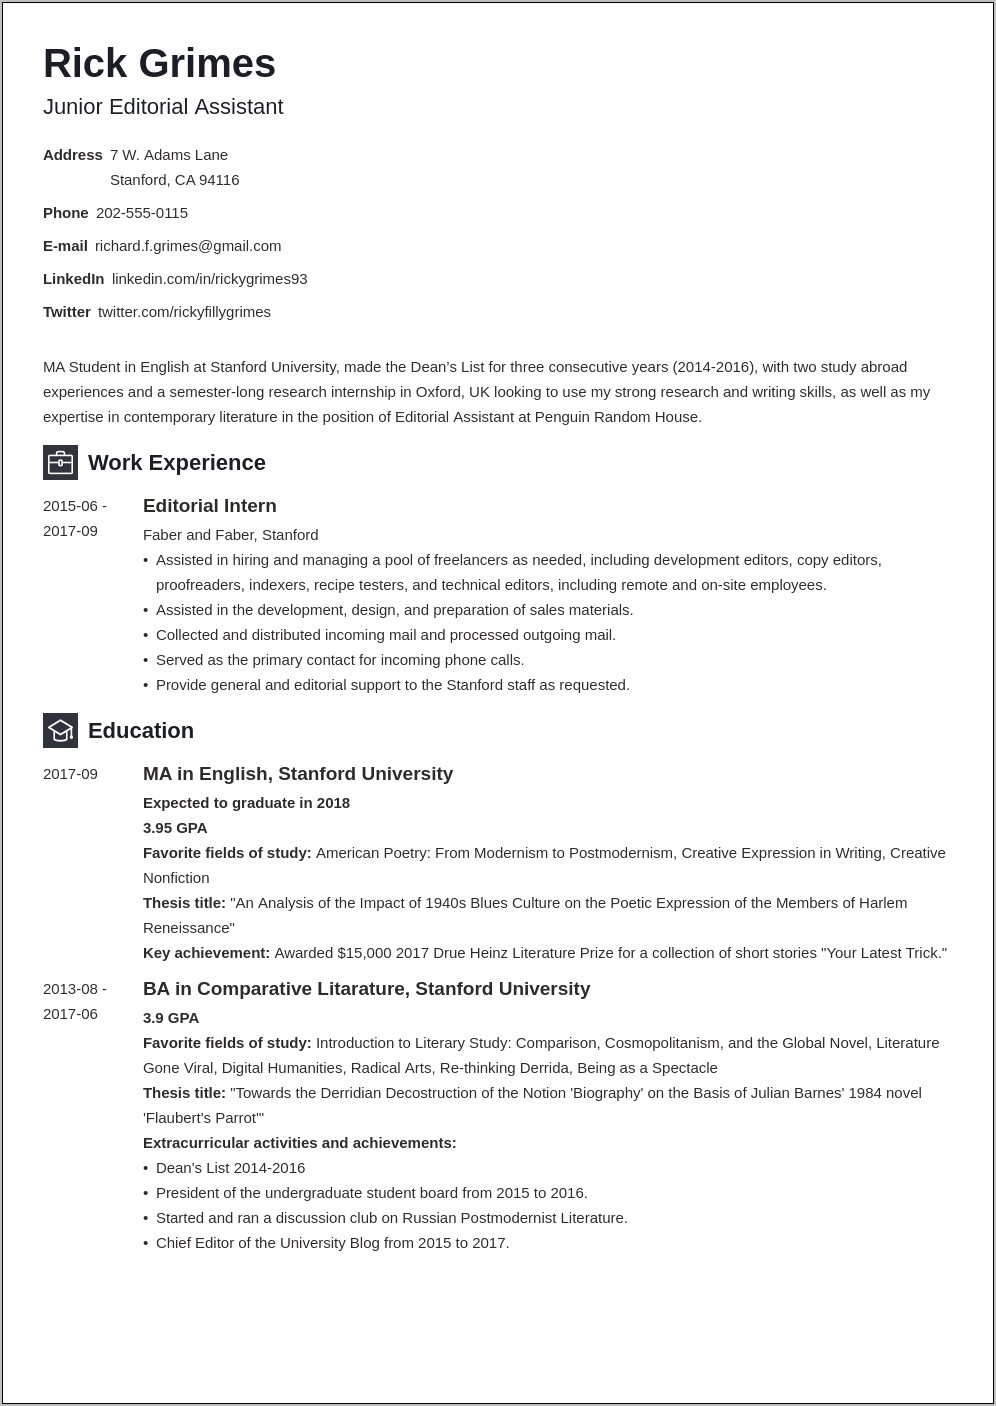 Resumes With Less Than A Year Work Experience